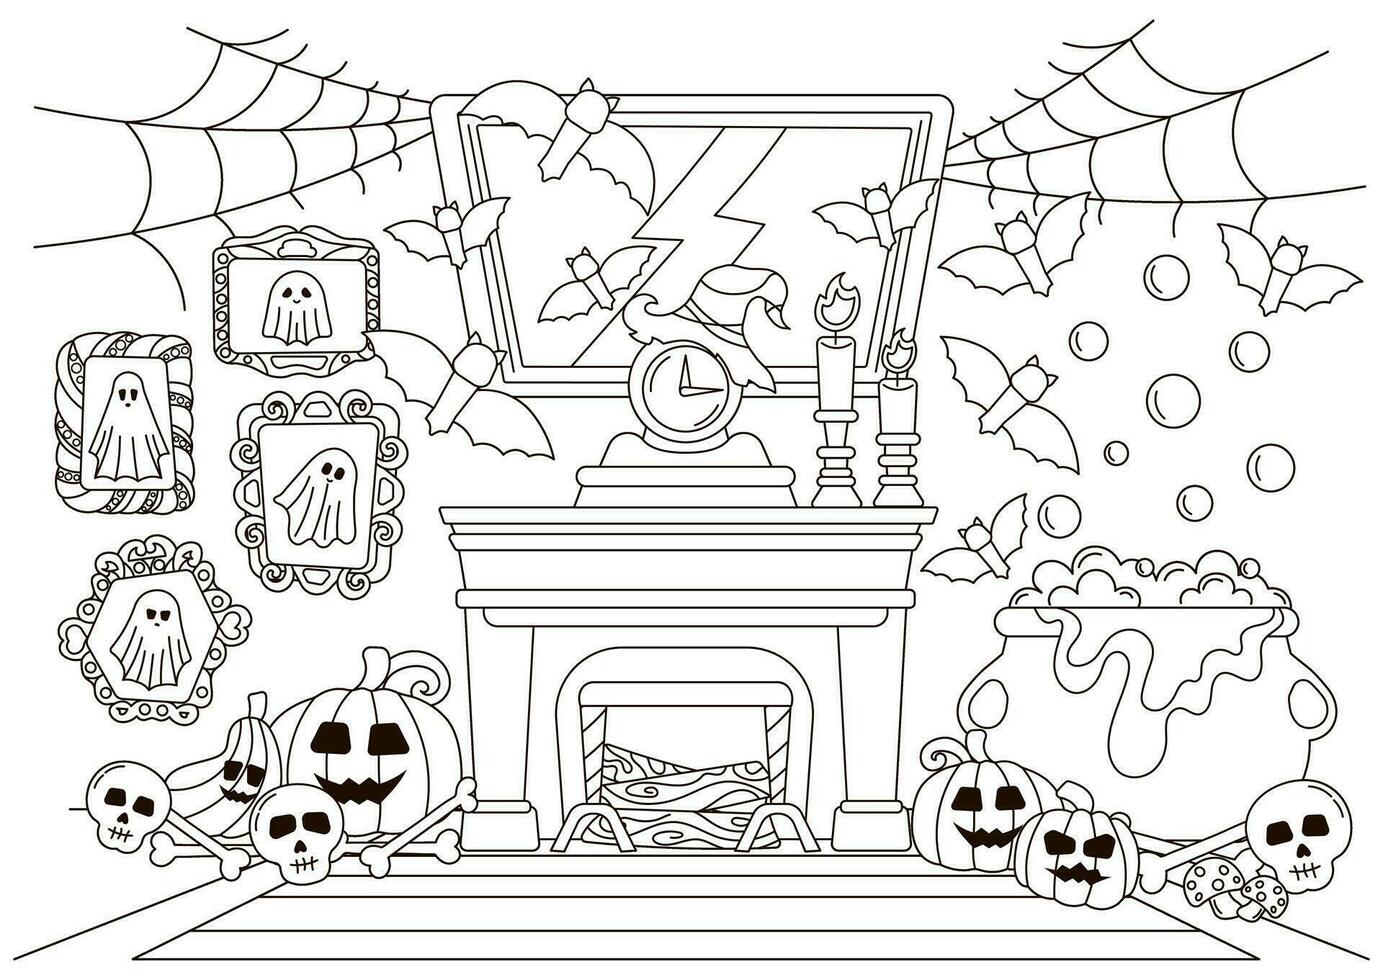 Halloween cozy indoor interior of living room with fireplace and bat, pumplin characters coloring page vector